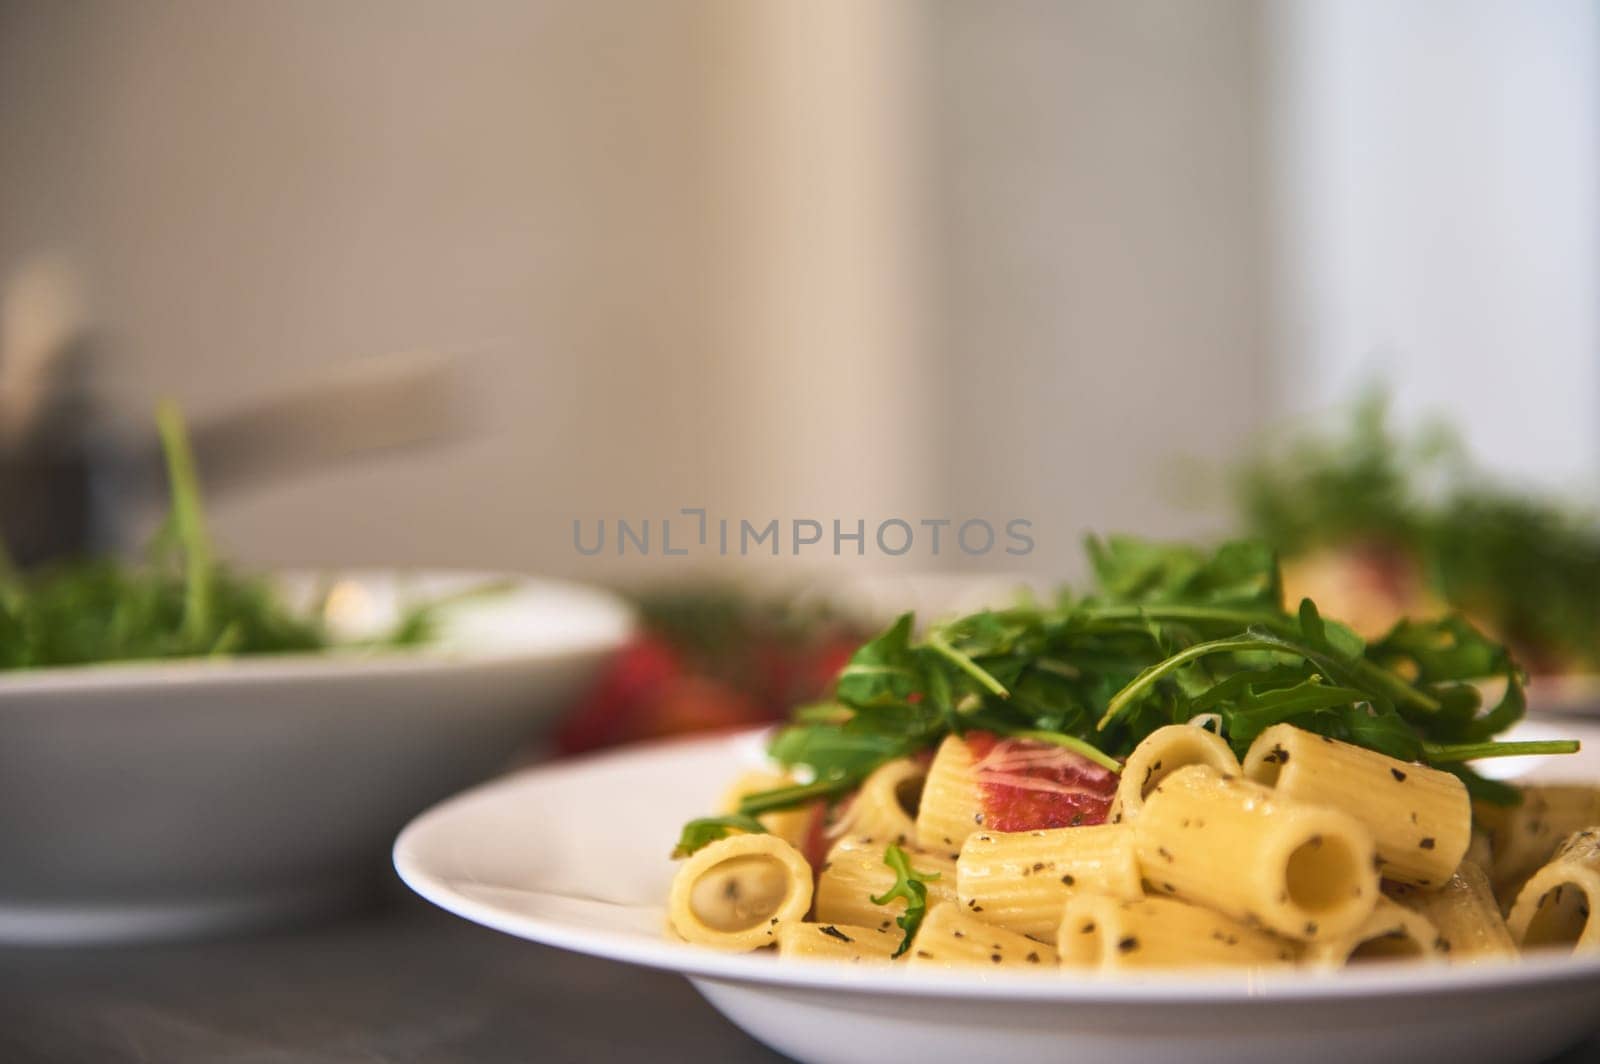 Classic Italian cuisine dish. Pasta penne with tomatoes, arugula leaves and parmesan cheese. Copy advertising space. Food background. Classic Italian cuisine dish. by artgf